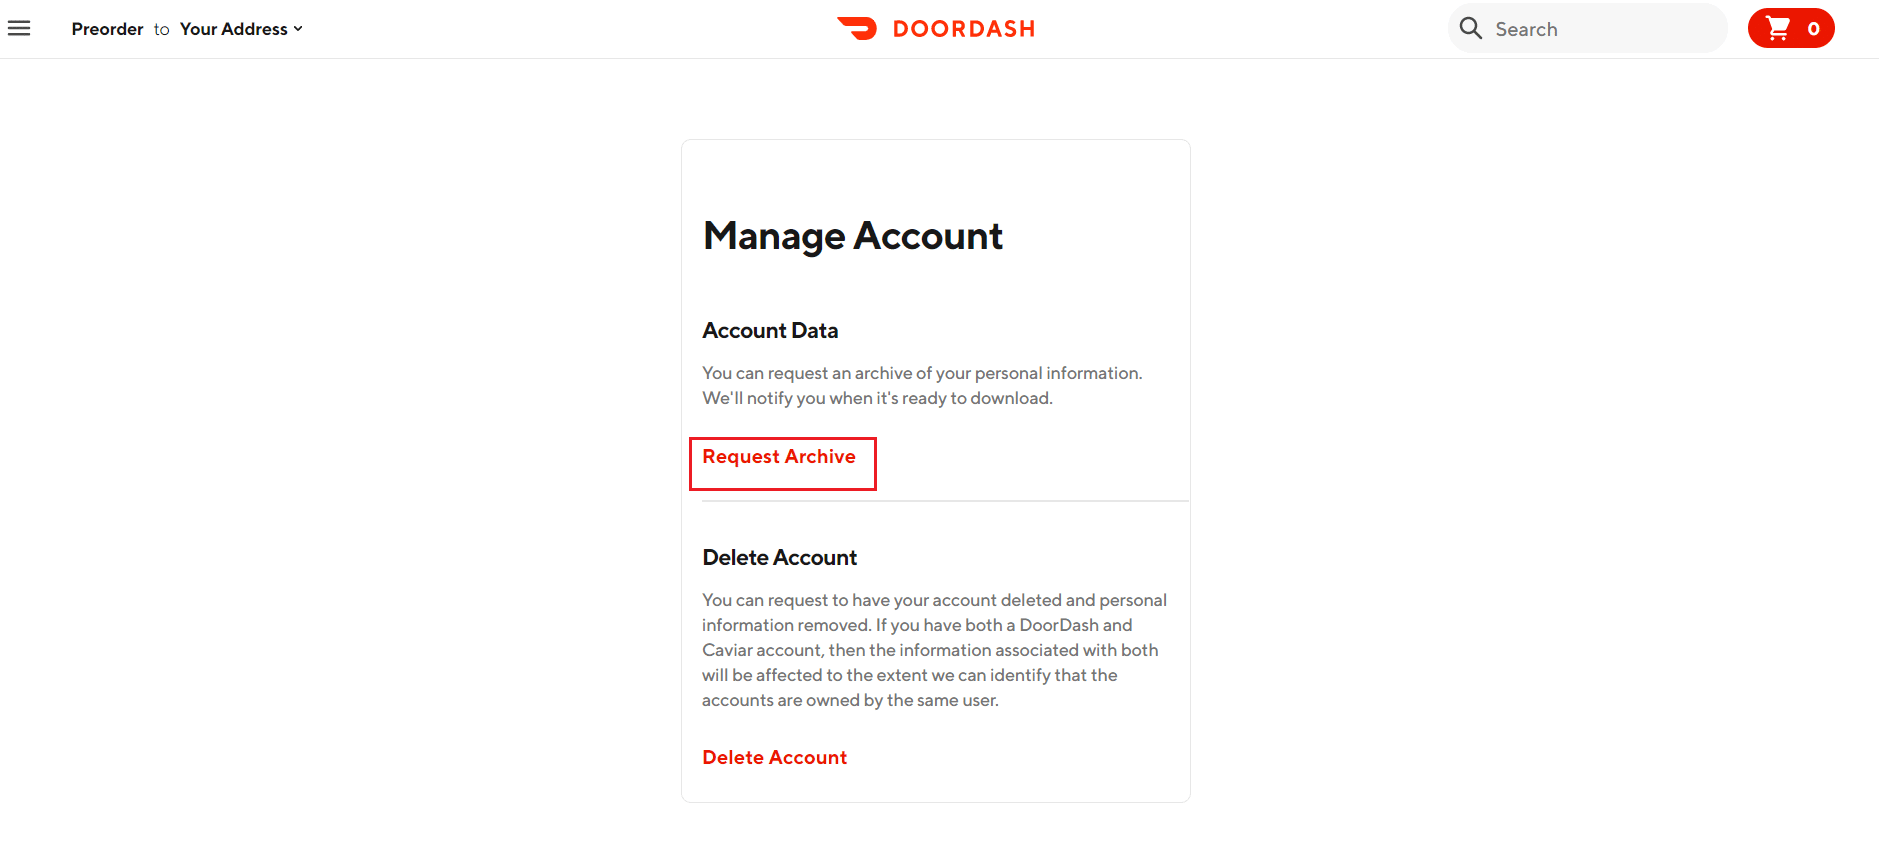 request archive in DoorDash Manage Account page